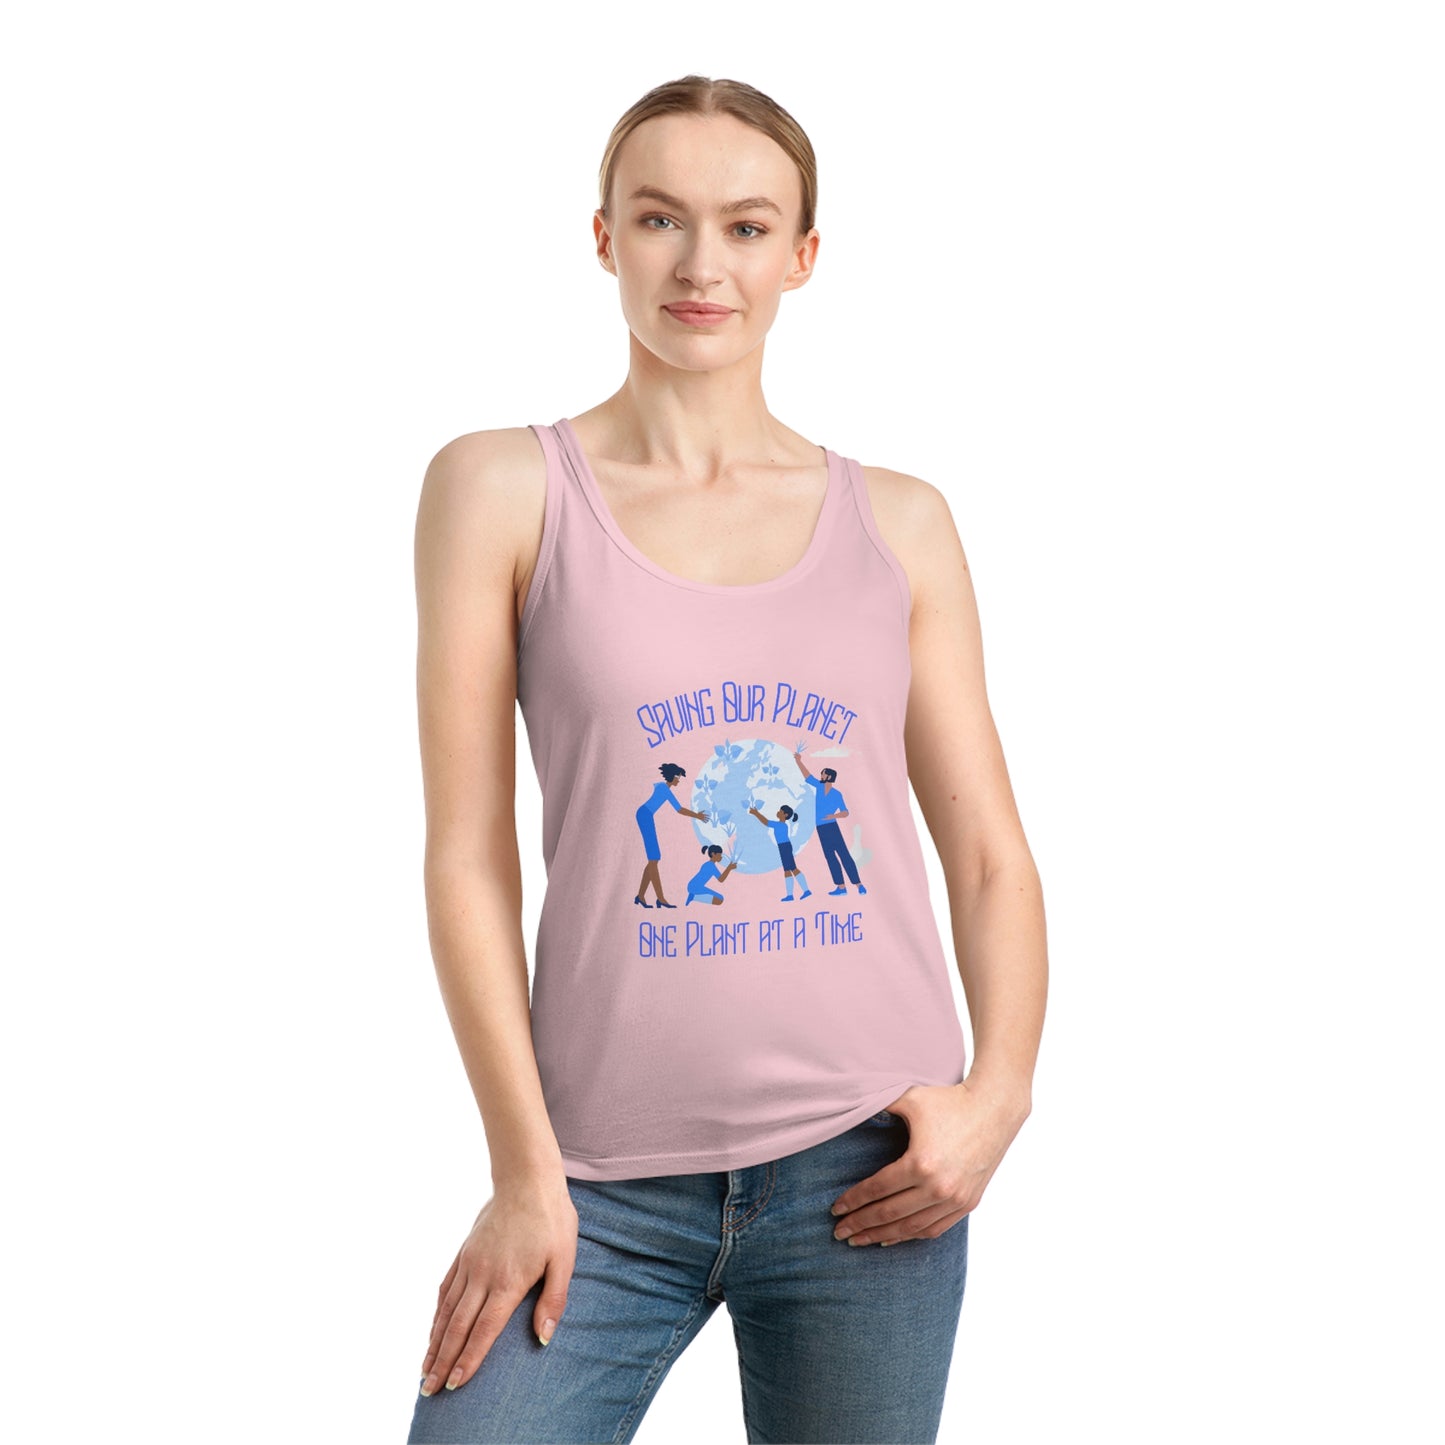 ‘Saving Our Planet One Plant at a Time’  Eco-Friendly, Printed Front & Back. Women's Dreamer Tank Top